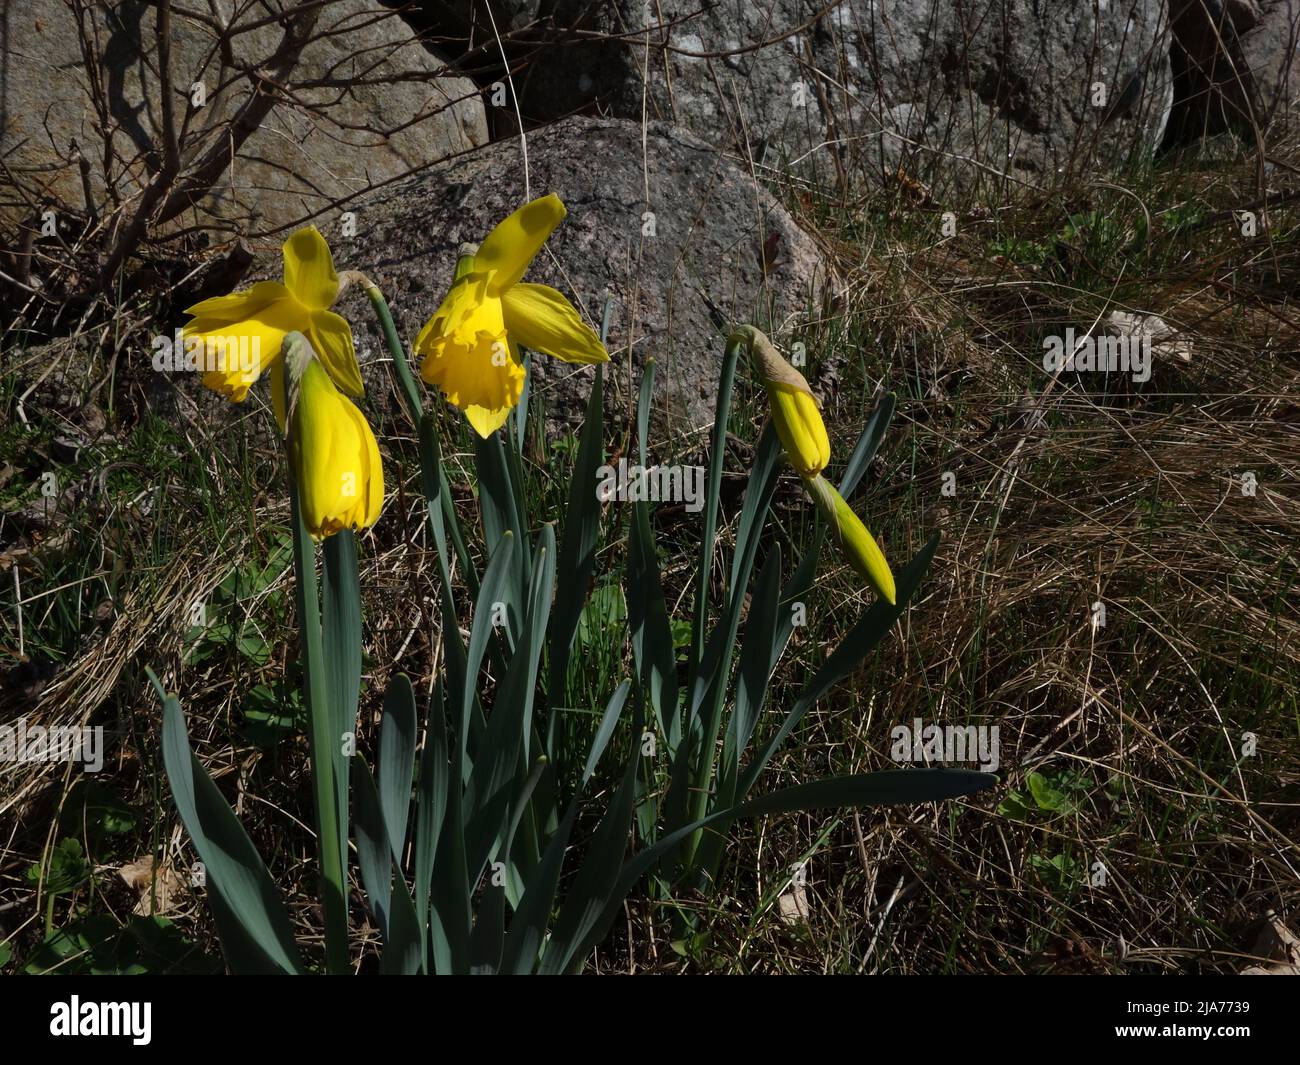 Along the stone fence, the daffodils are in bloom. Stock Photo